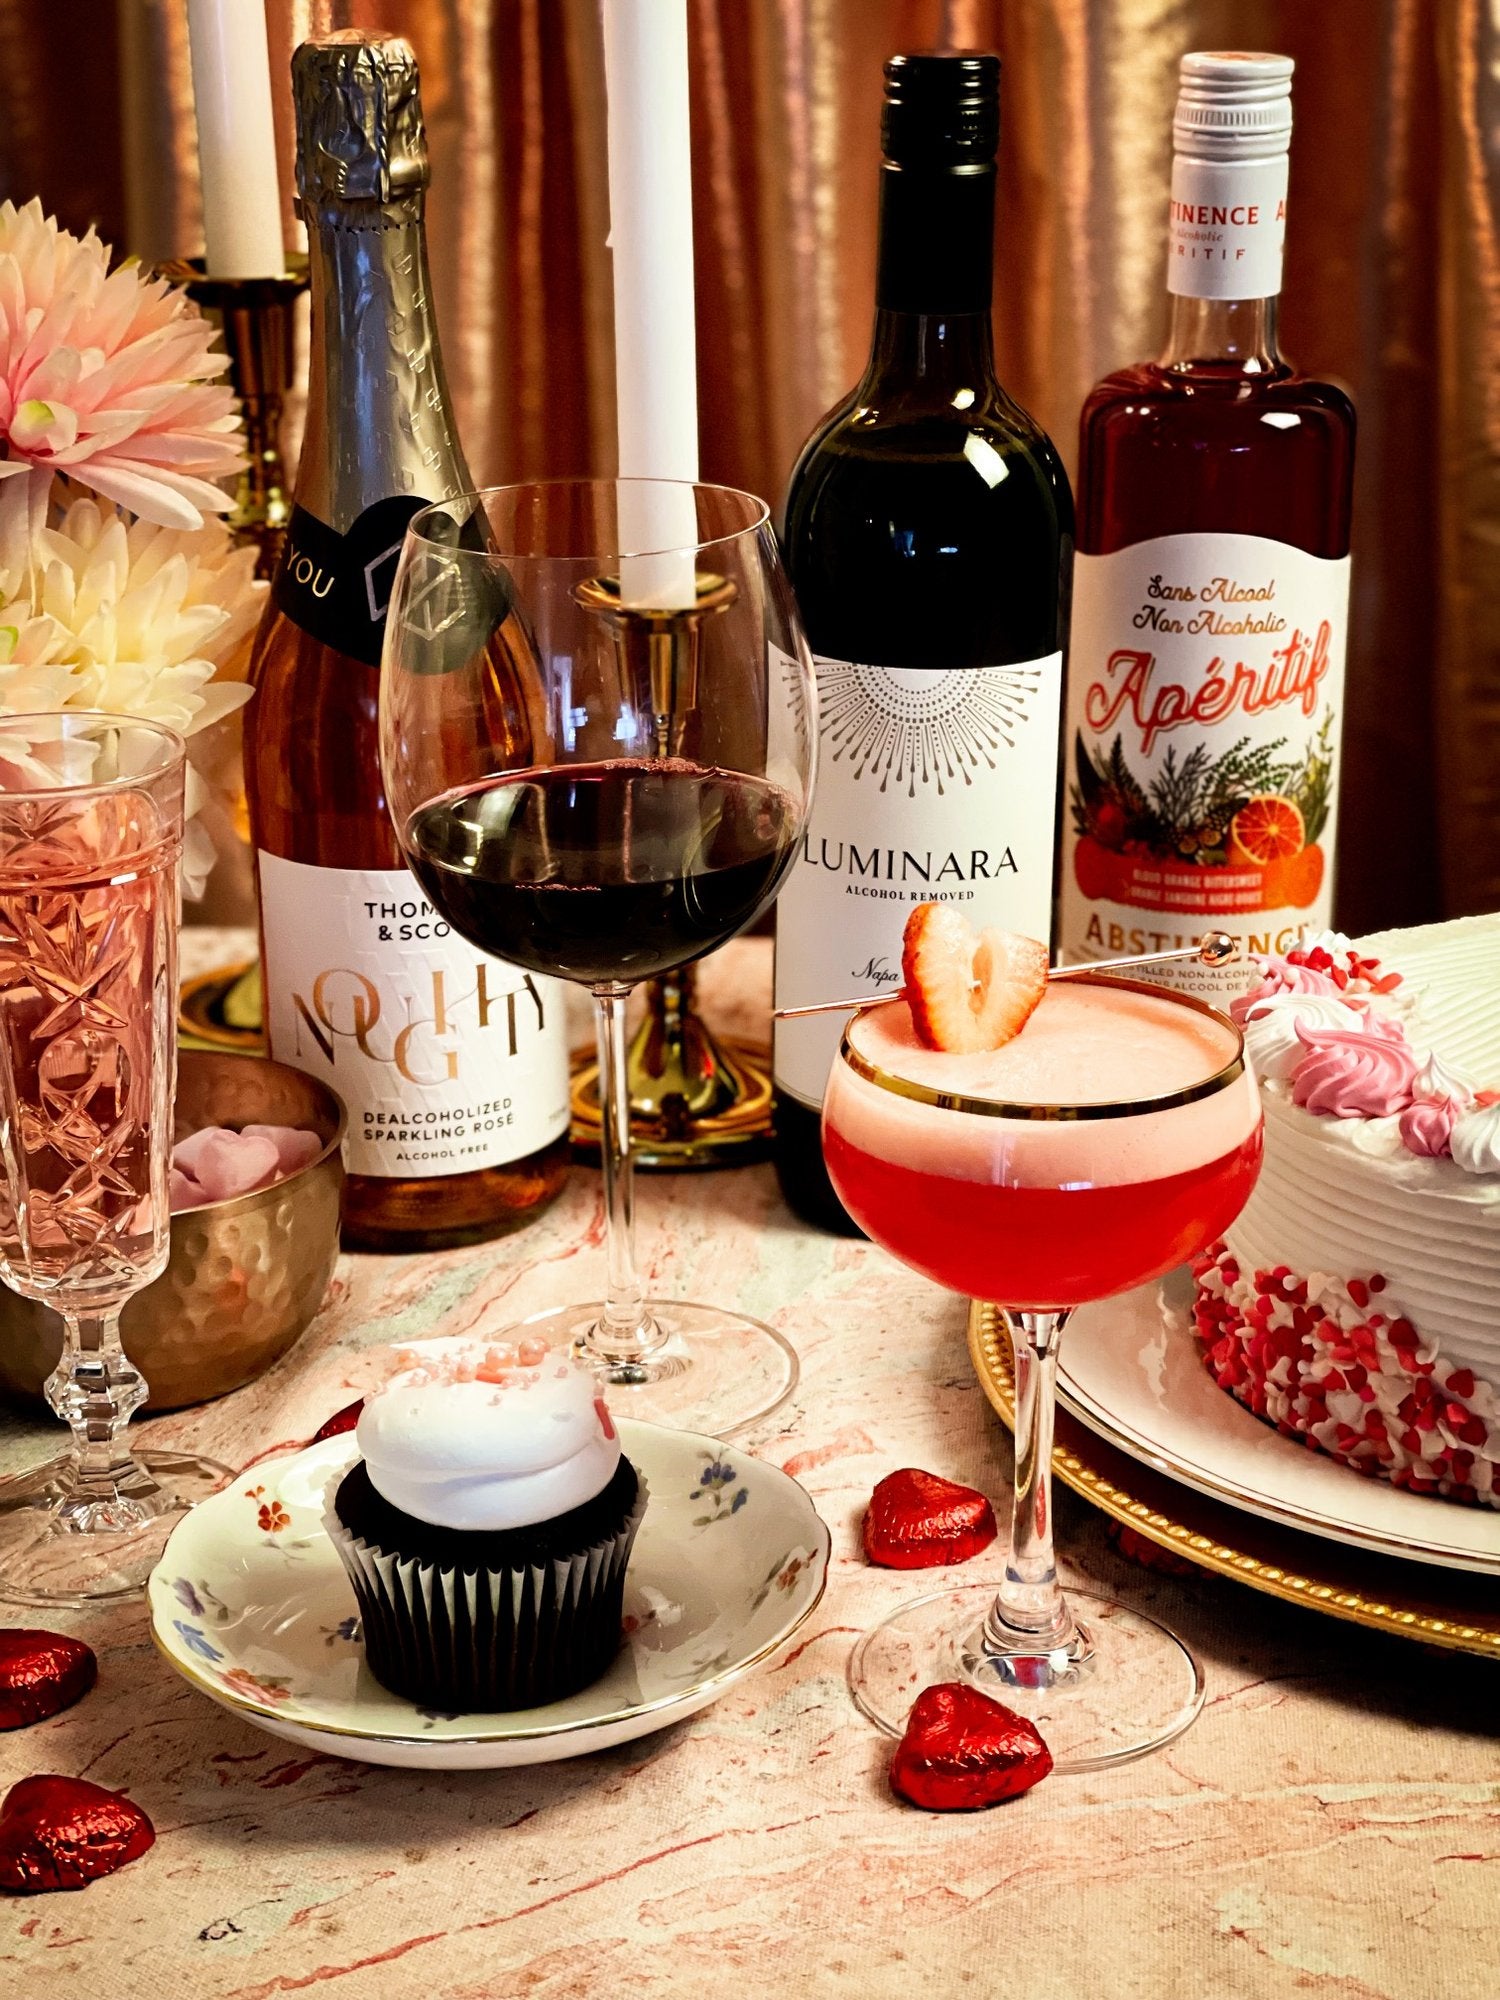 group shot of luminara red wine in dark bottle, abstinence aperitif red spirit with organges on label, bottle of noughty sparkling rose wine, glass of red wine and delicious red cocktail with strawberry garnish, on a table scarpe with a valentine cake, chocolate cupcake and heart shaped chocolates.  flowers and candles in background